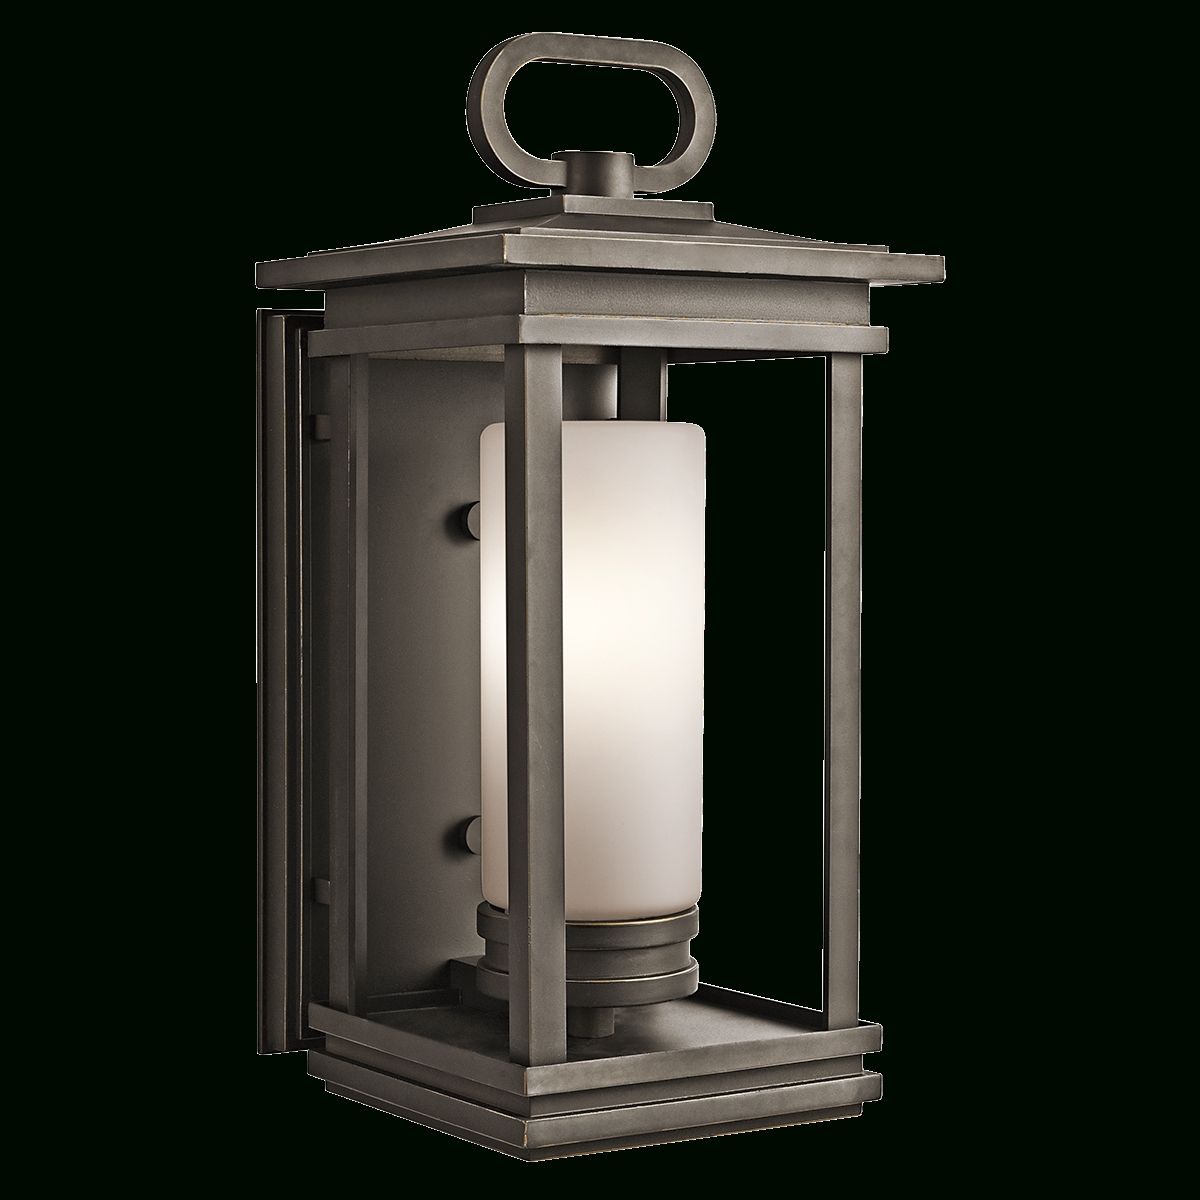 Kichler – South Hope Large Fluorescent Outdoor Lantern In Bronze With Kichler Lighting Outdoor Wall Lanterns (View 10 of 15)